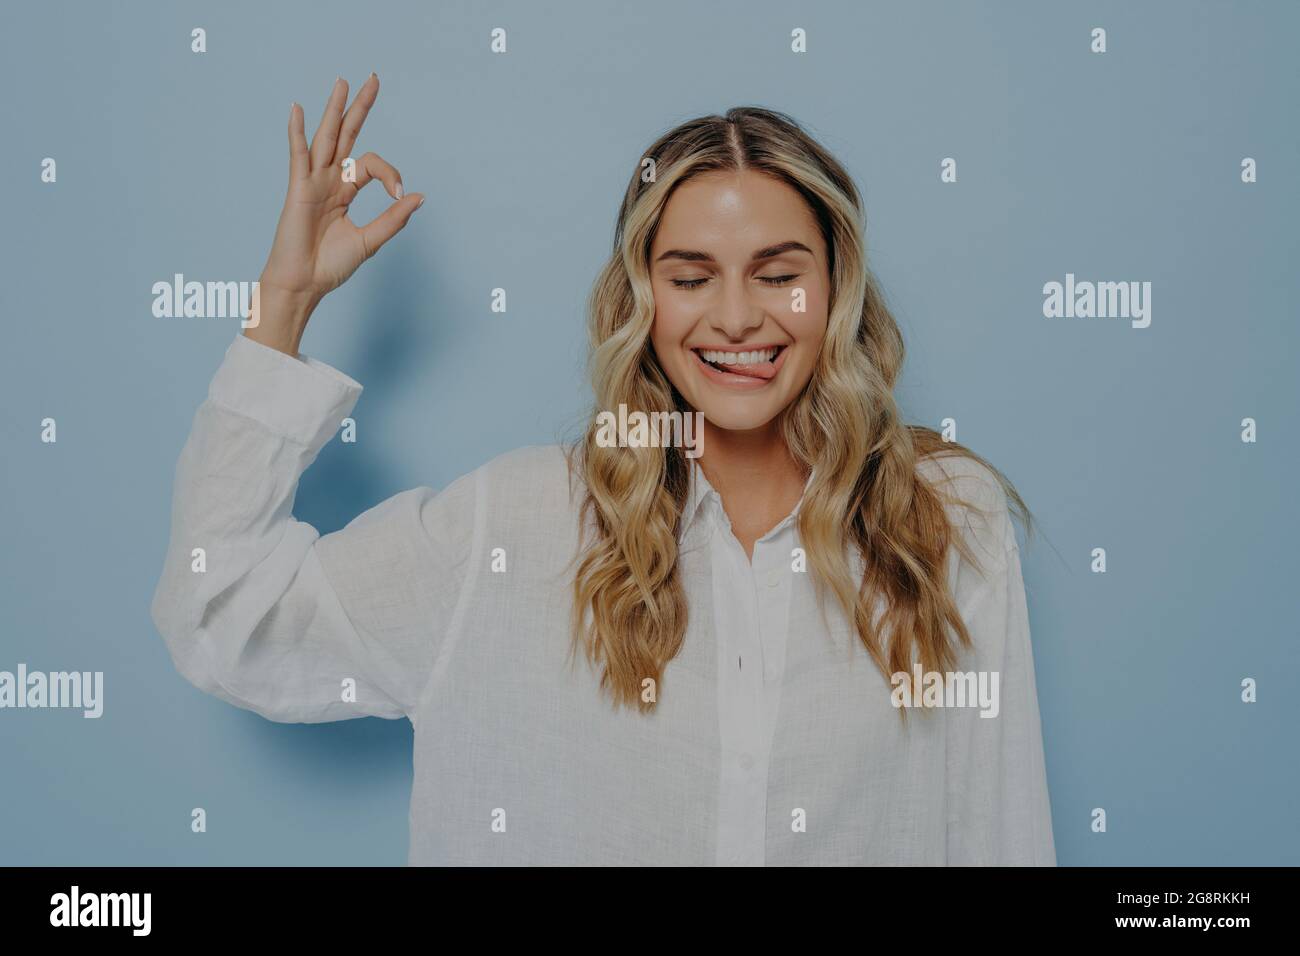 Crazy blonde woman making ok gesture while showing tongue Stock Photo